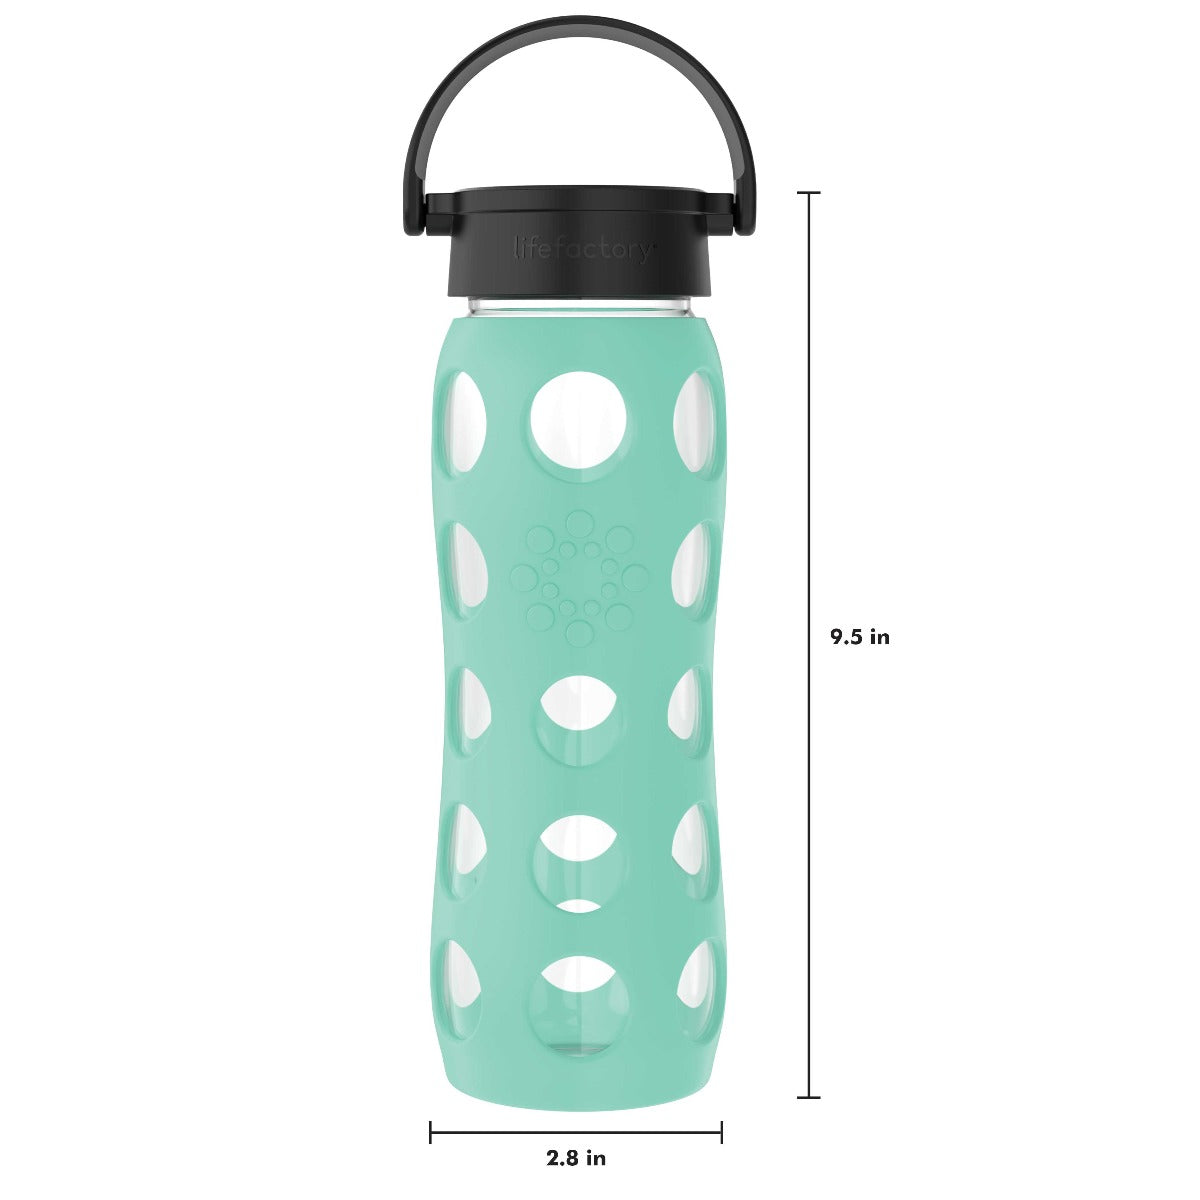 Lifefactory 22oz Glass Water Bottle with Silicone Sleeve & Active Flip Cap - Denim